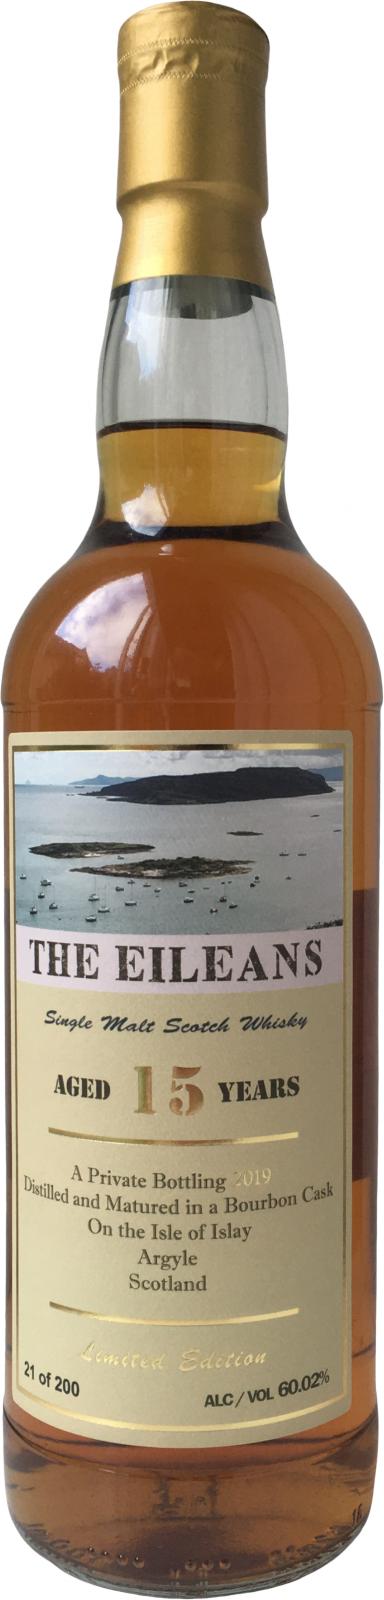 The Eileans 15-year-old